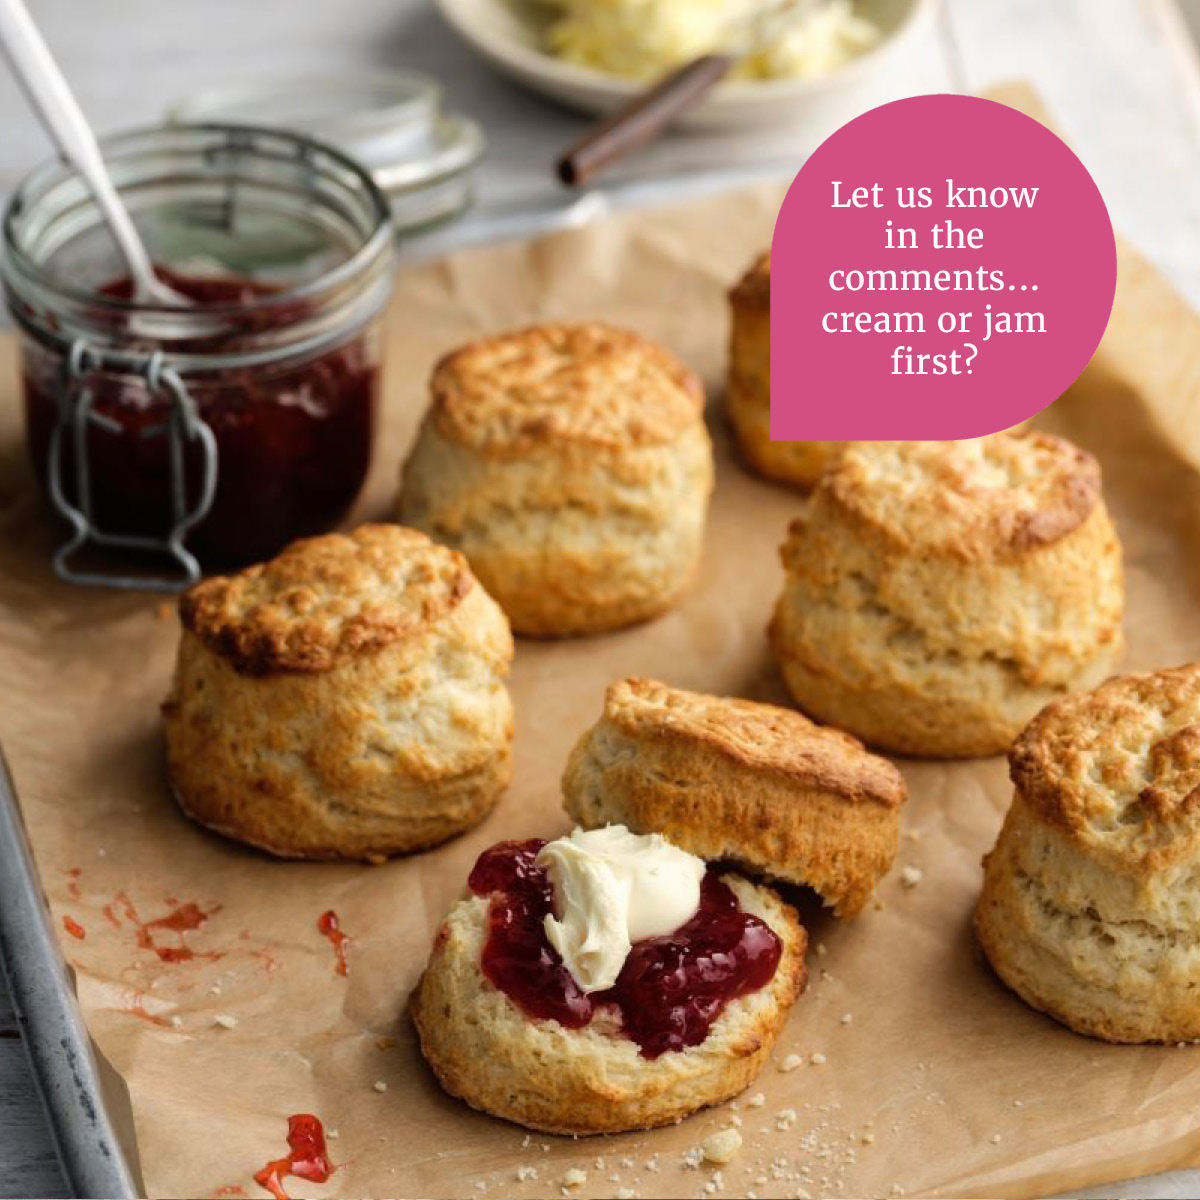 What does your afternoon tea look like? Afternoon tea is the most common tea party and usually consists of tea, a selection of finger sandwiches, scones with clotted cream & jam and petite desserts. All made in the Thermomix, of course! Question is, cream or jam first?